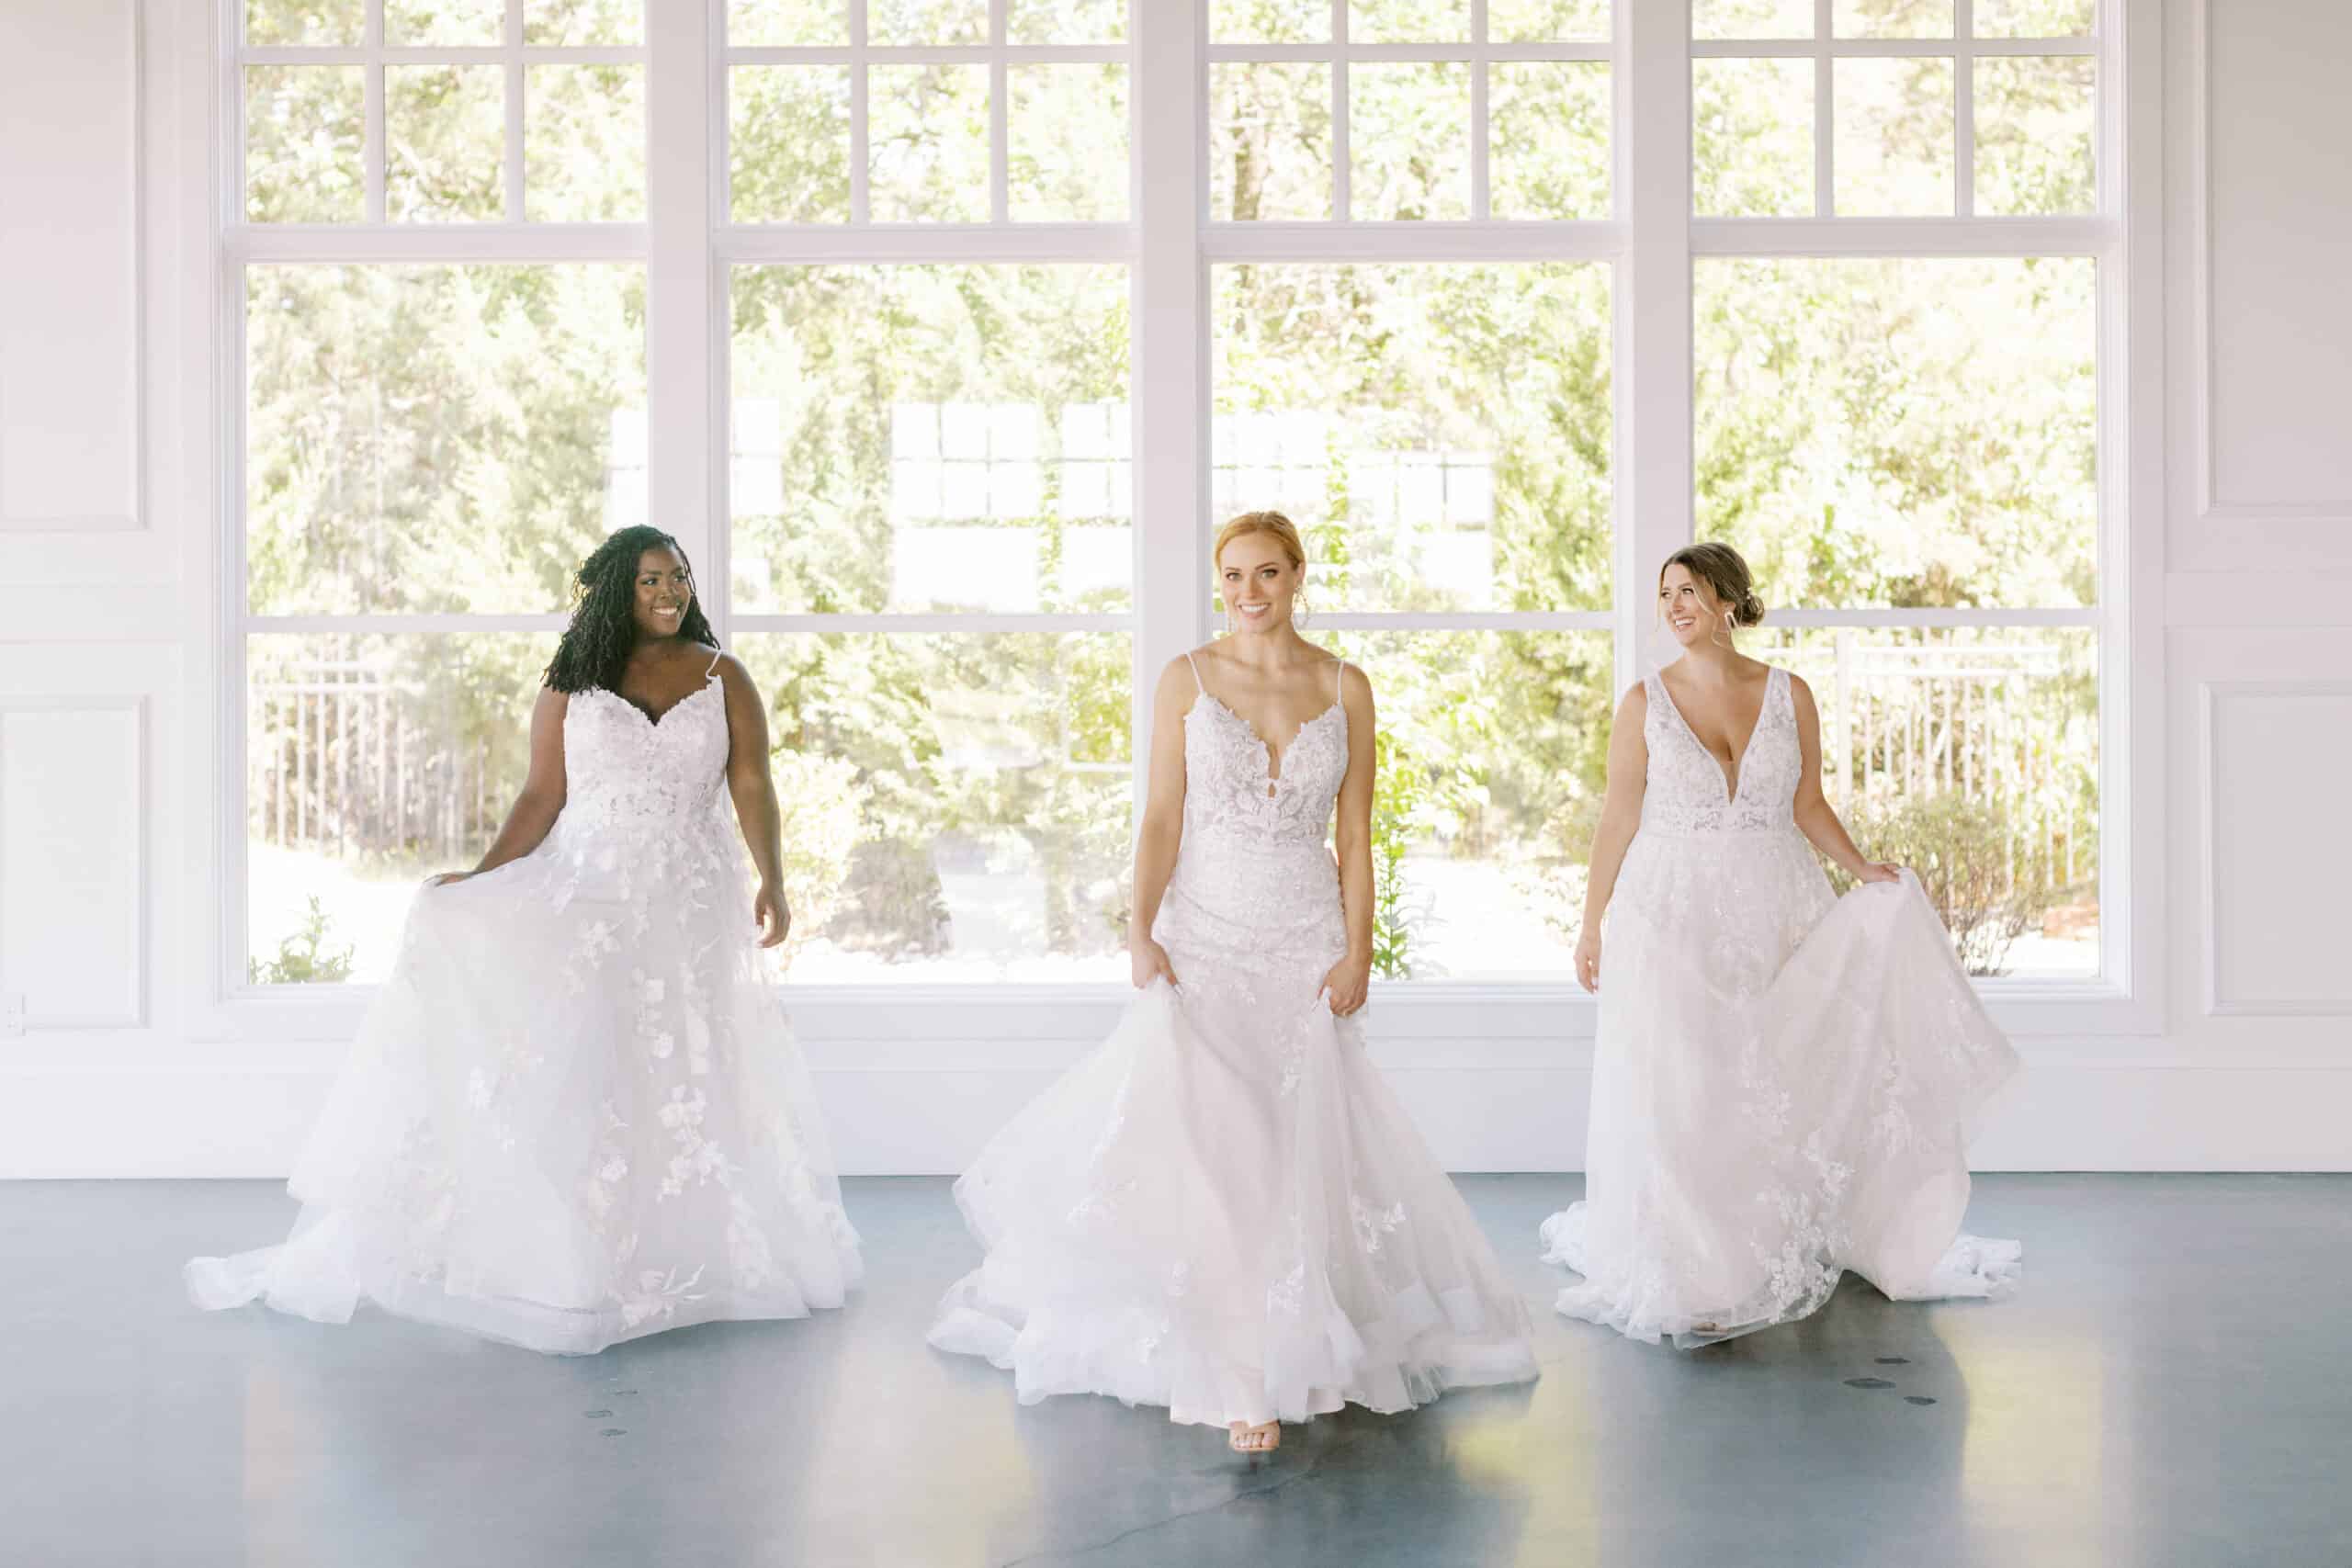 The Truth Behind Why Wedding Dress Sizes Run Small